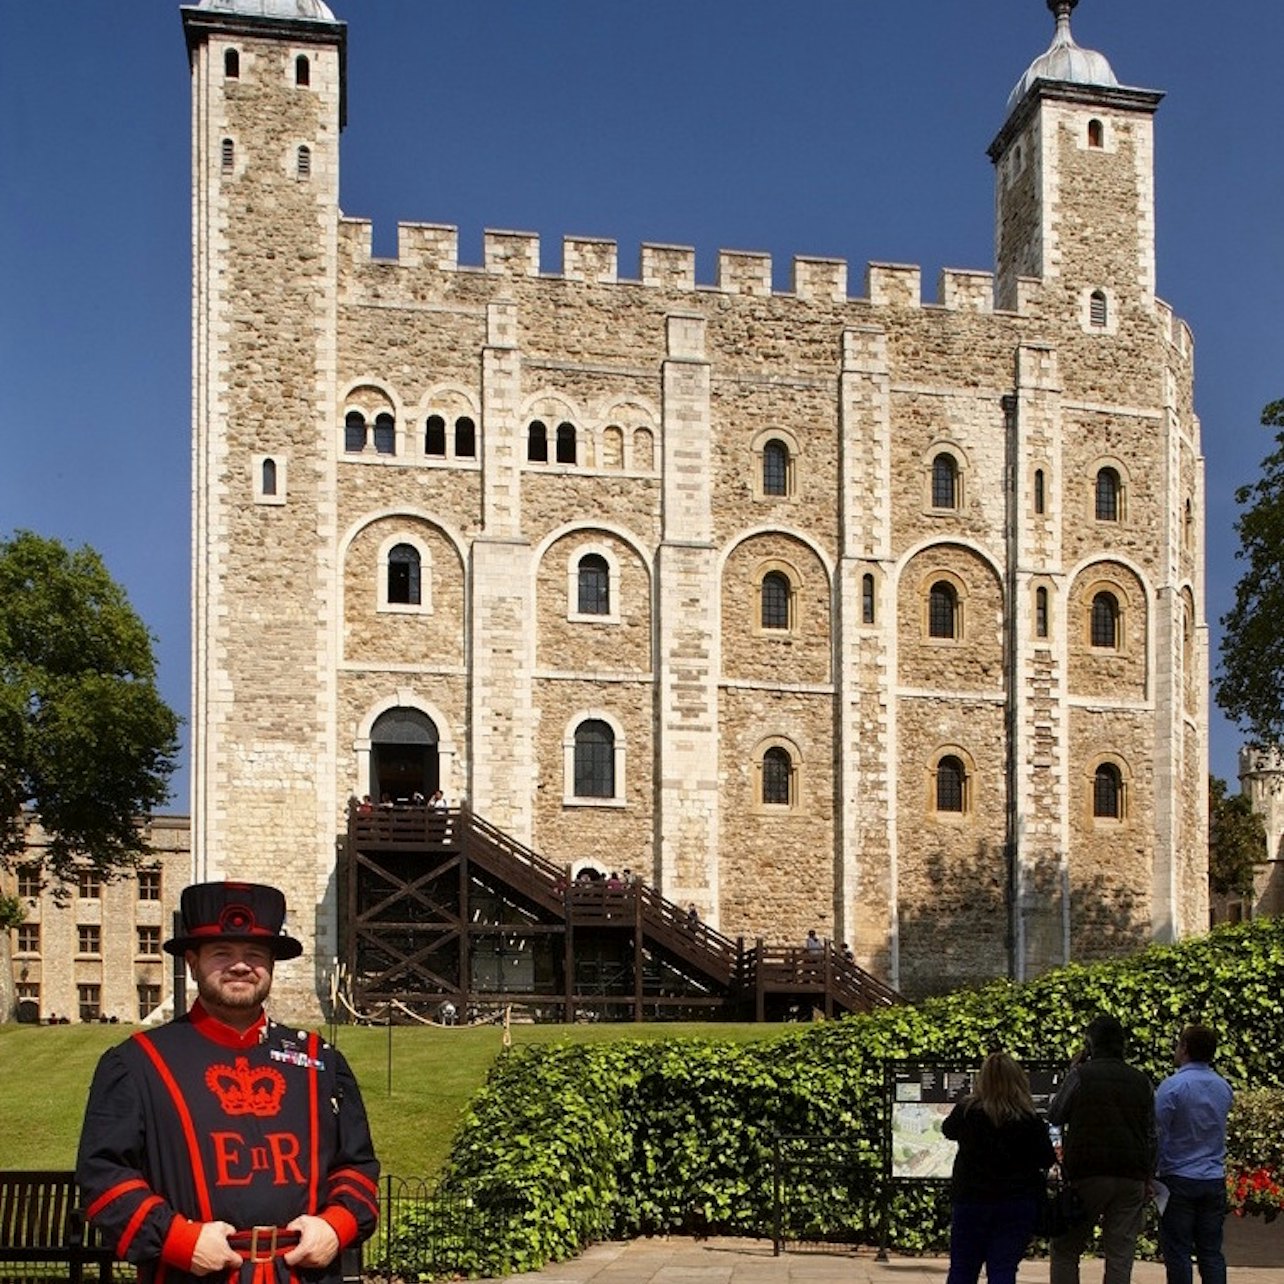 Tower of London: Entry Ticket